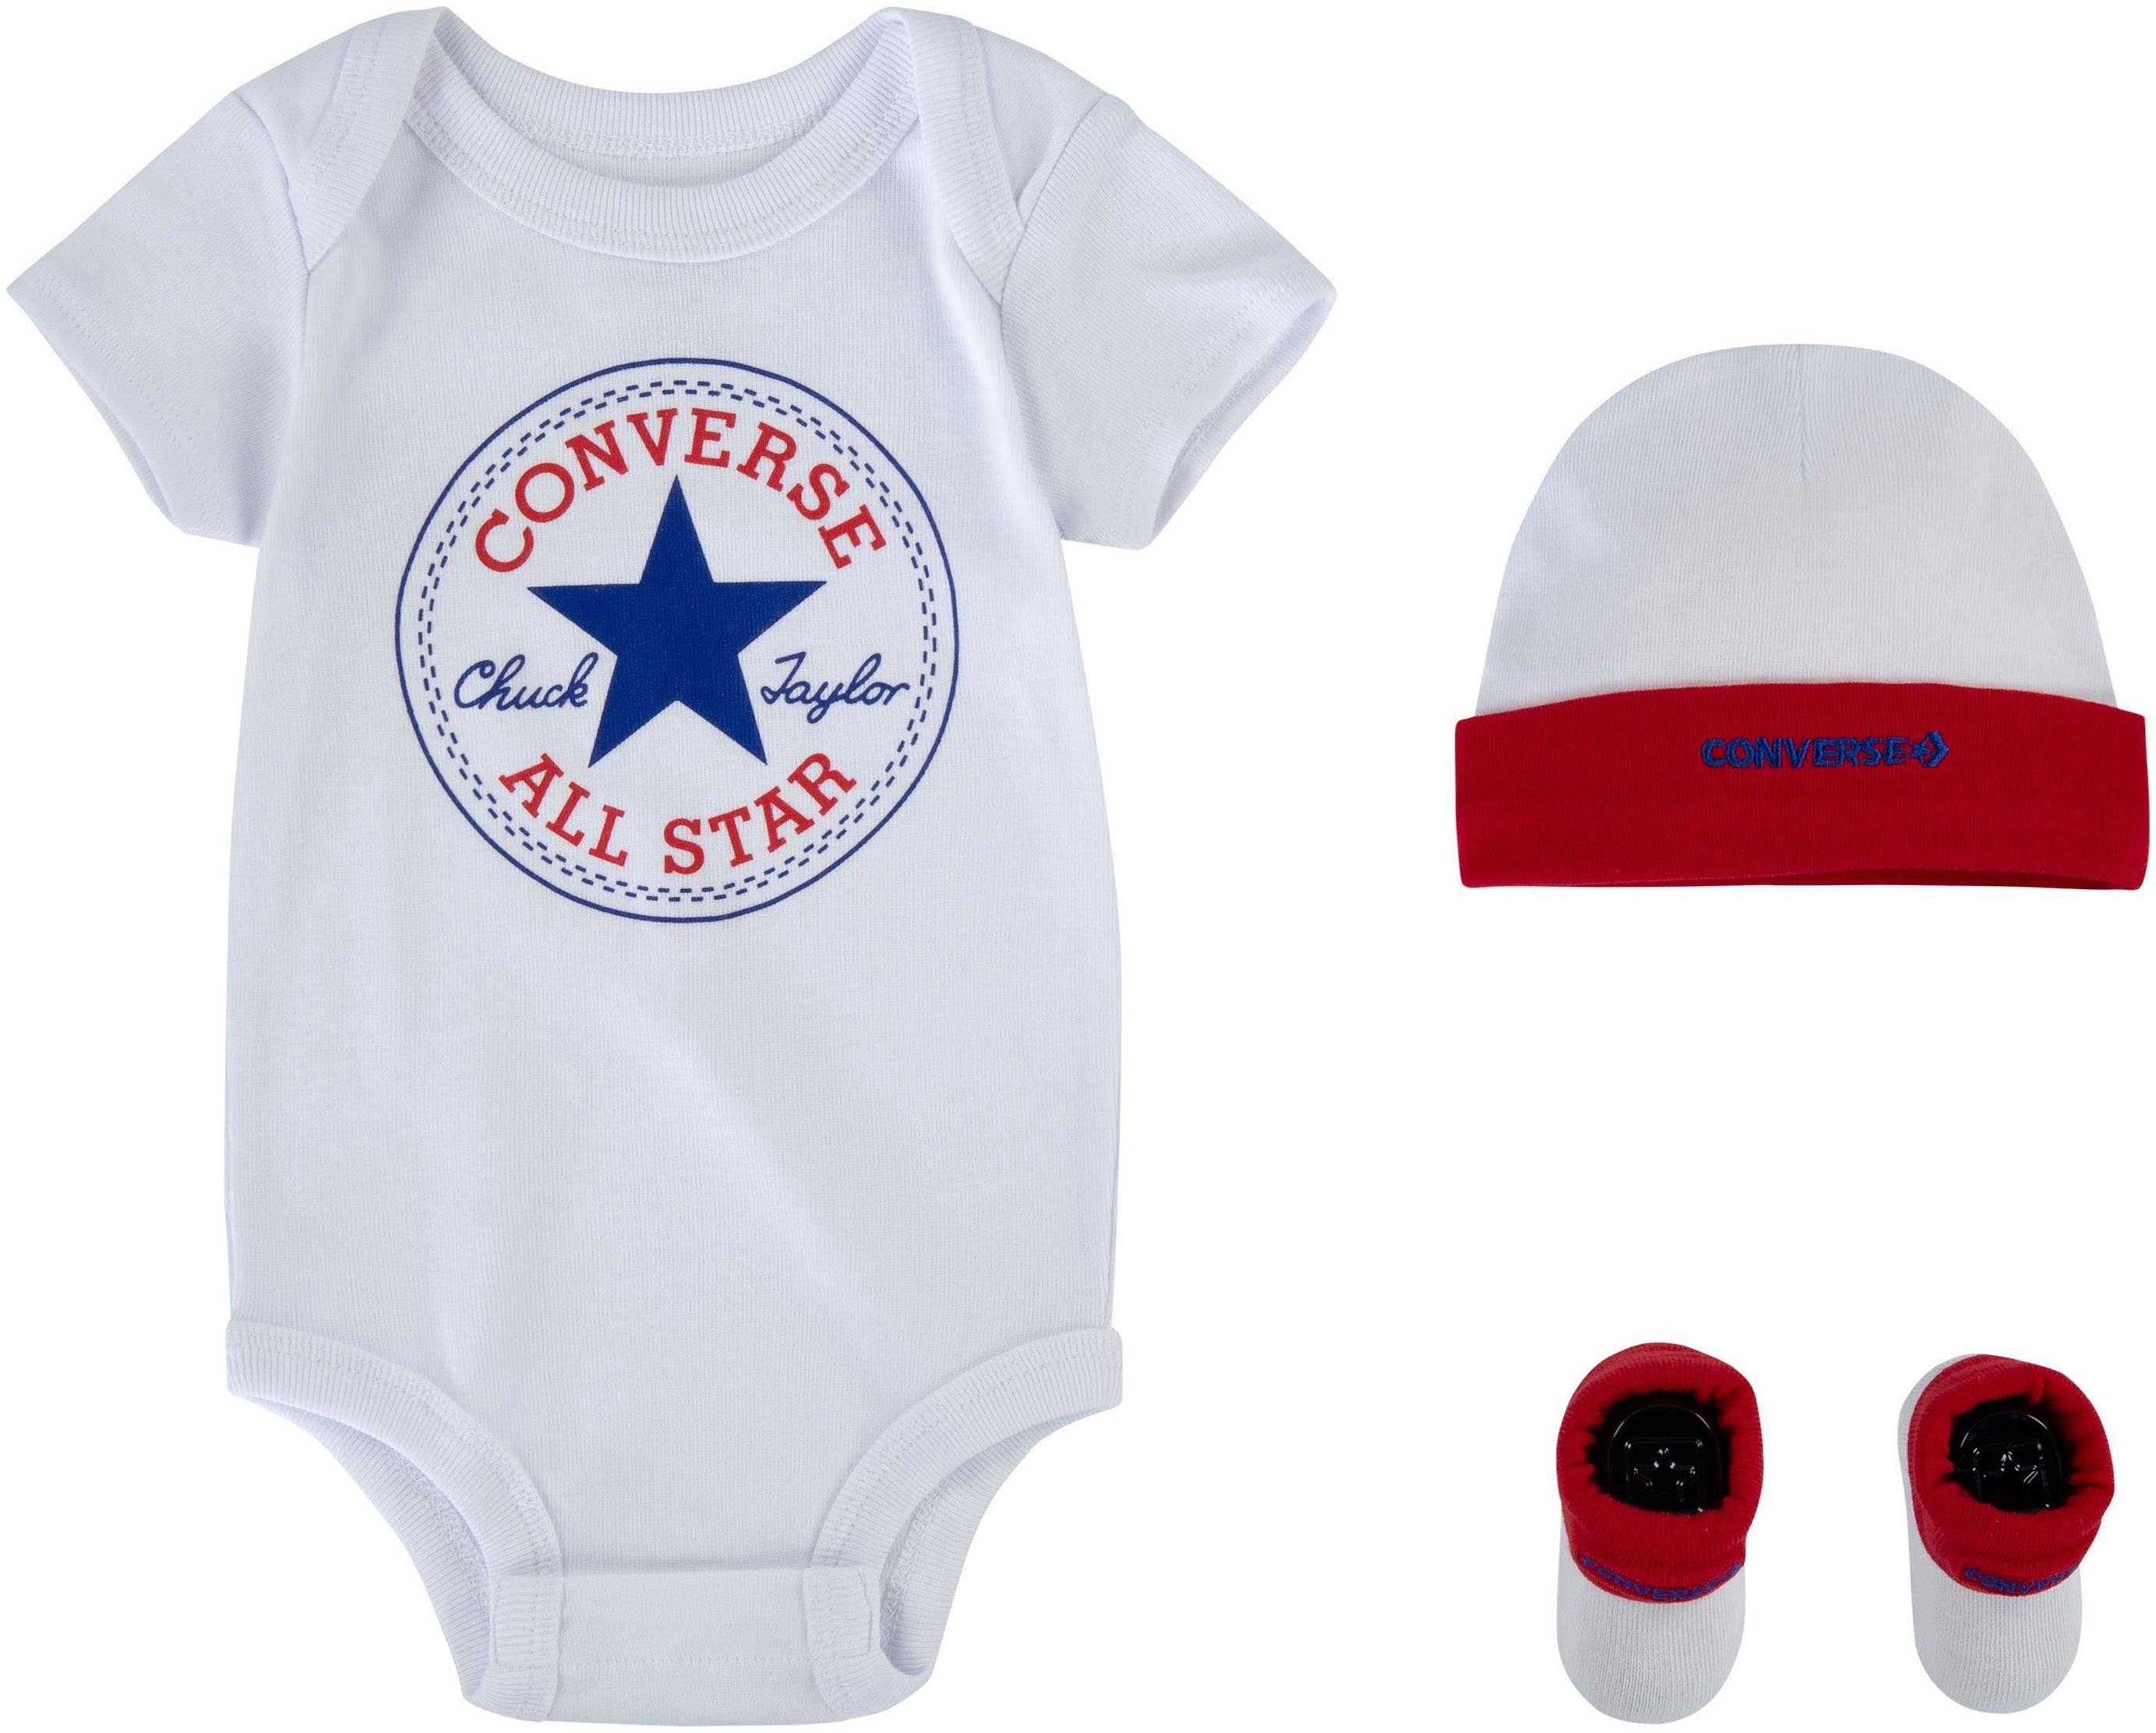 Body HAT Converse CTP 3-tlg) BODYSUIT (Packung, BOO CLASSIC INFANT